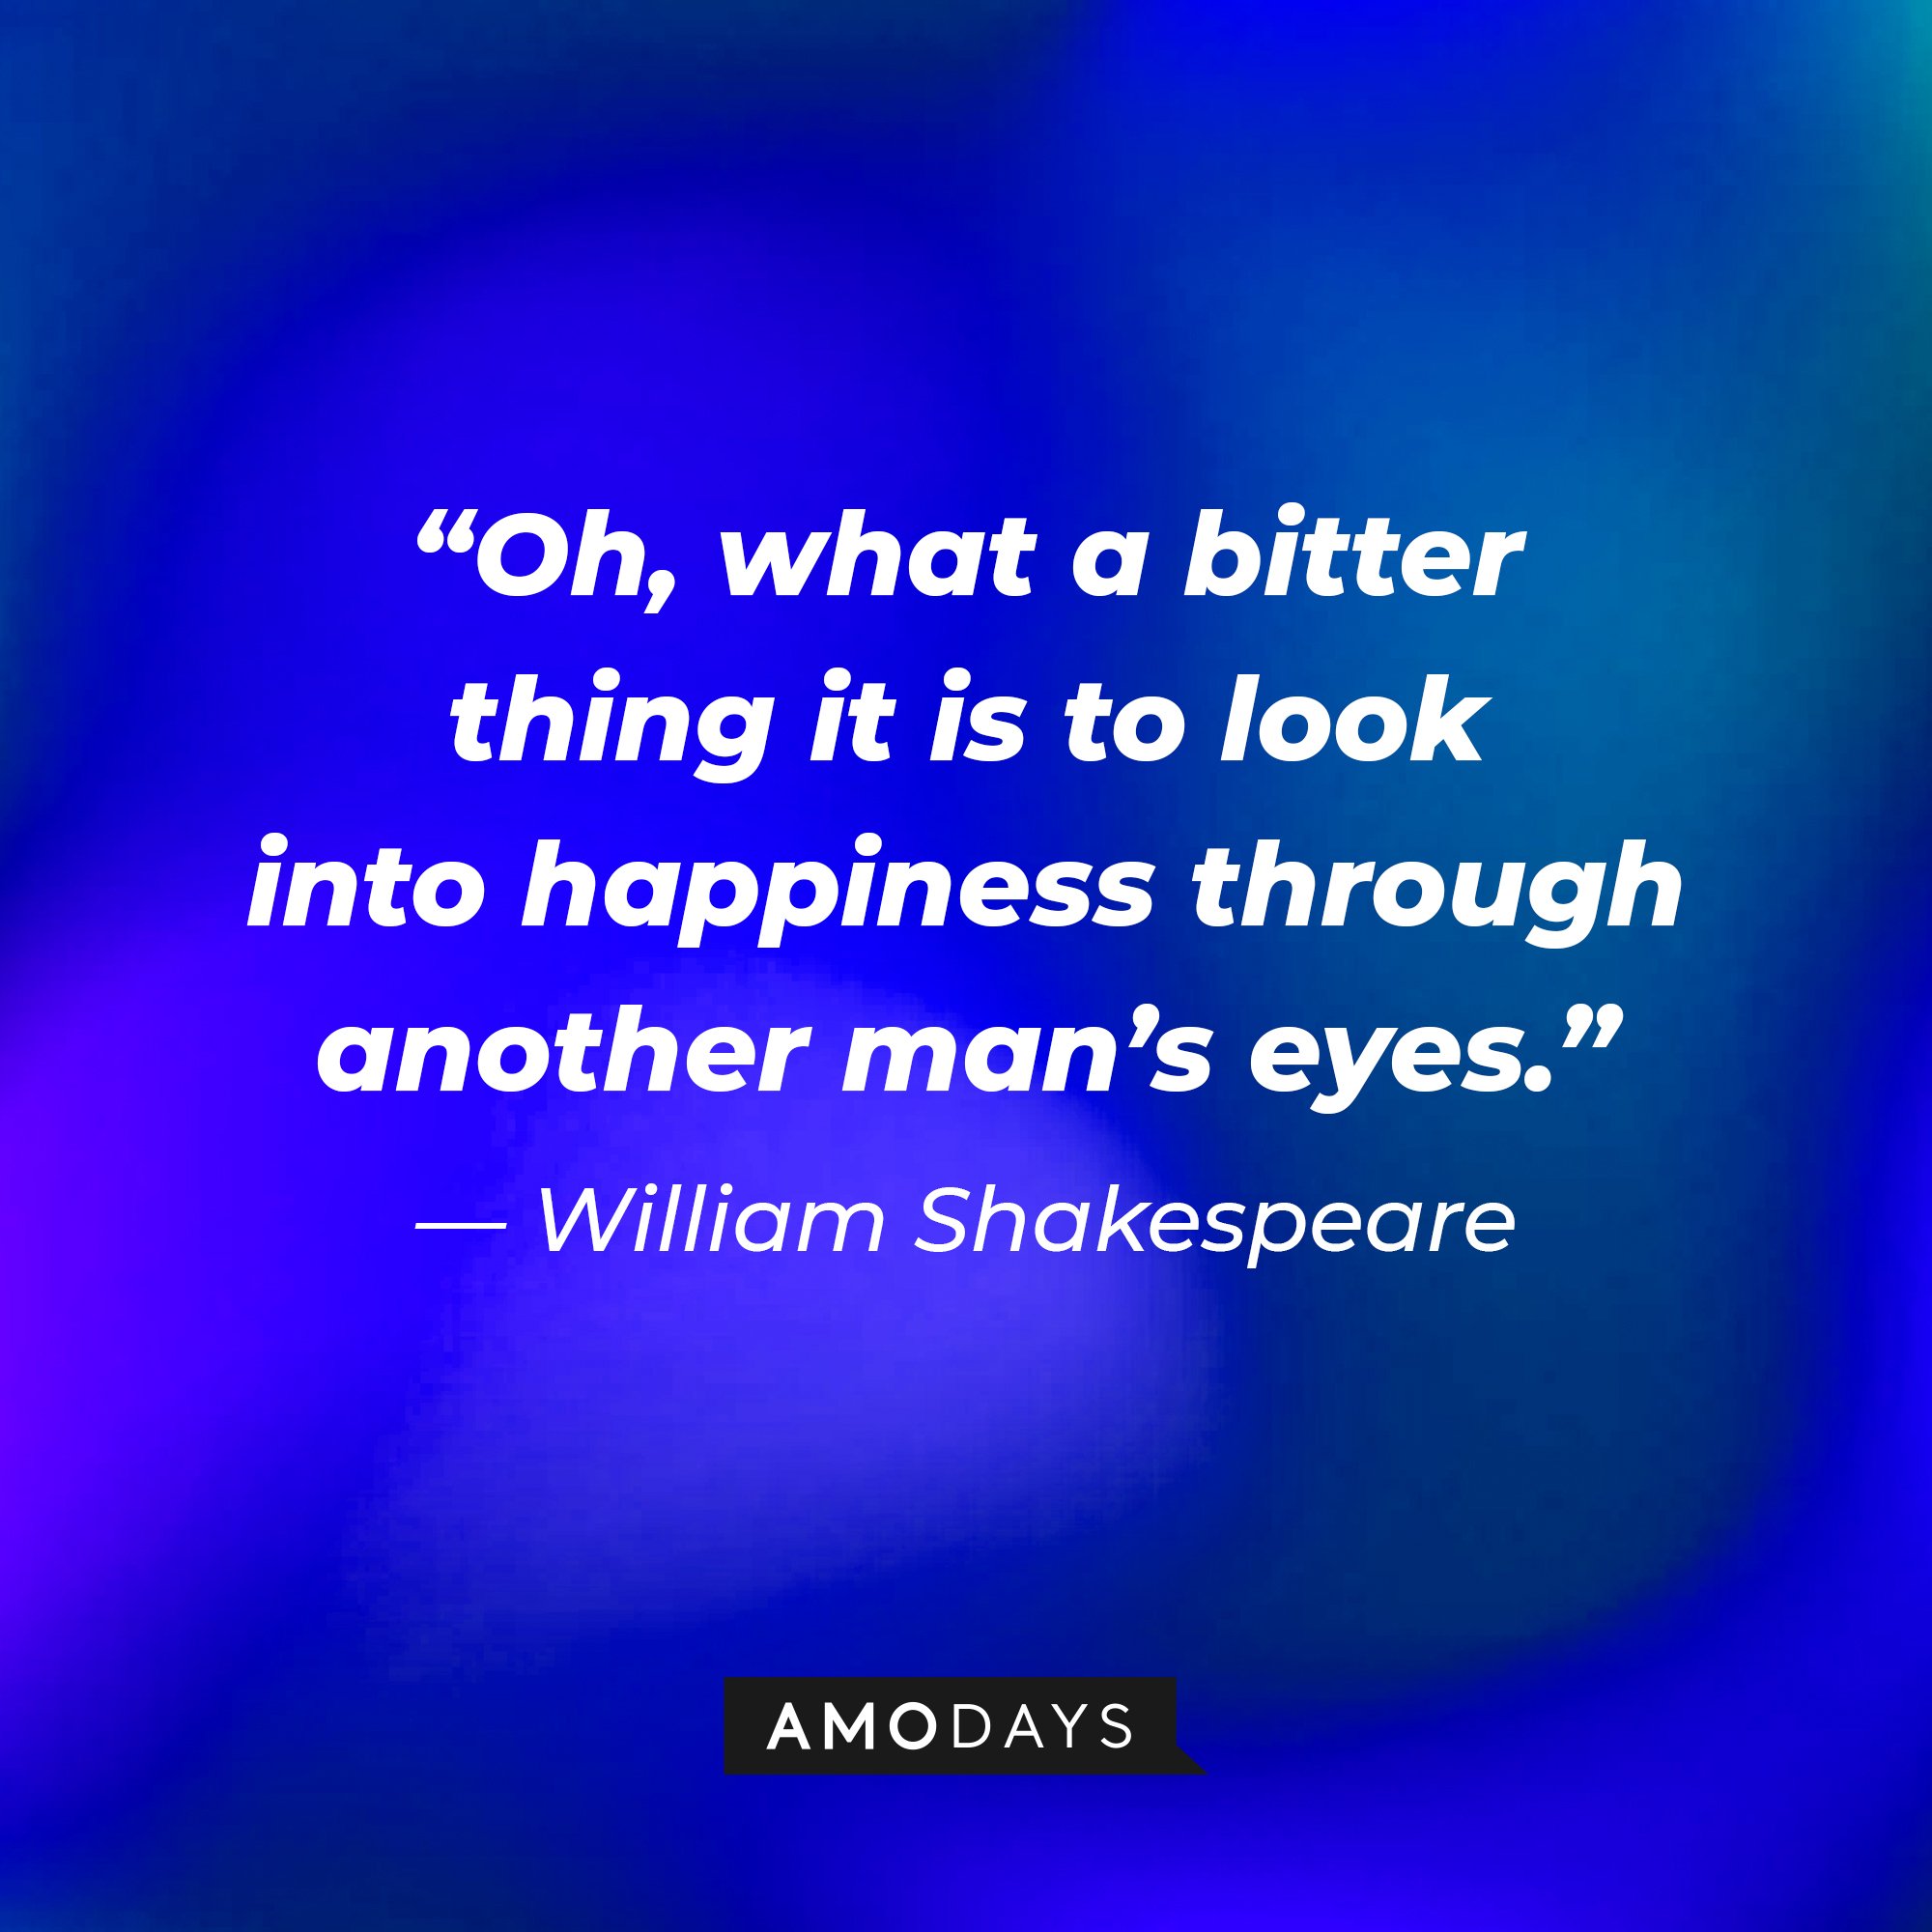 William Shakespeare's quote: “Oh, what a bitter thing it is to look into happiness through another man’s eyes.” | Image: AmoDays